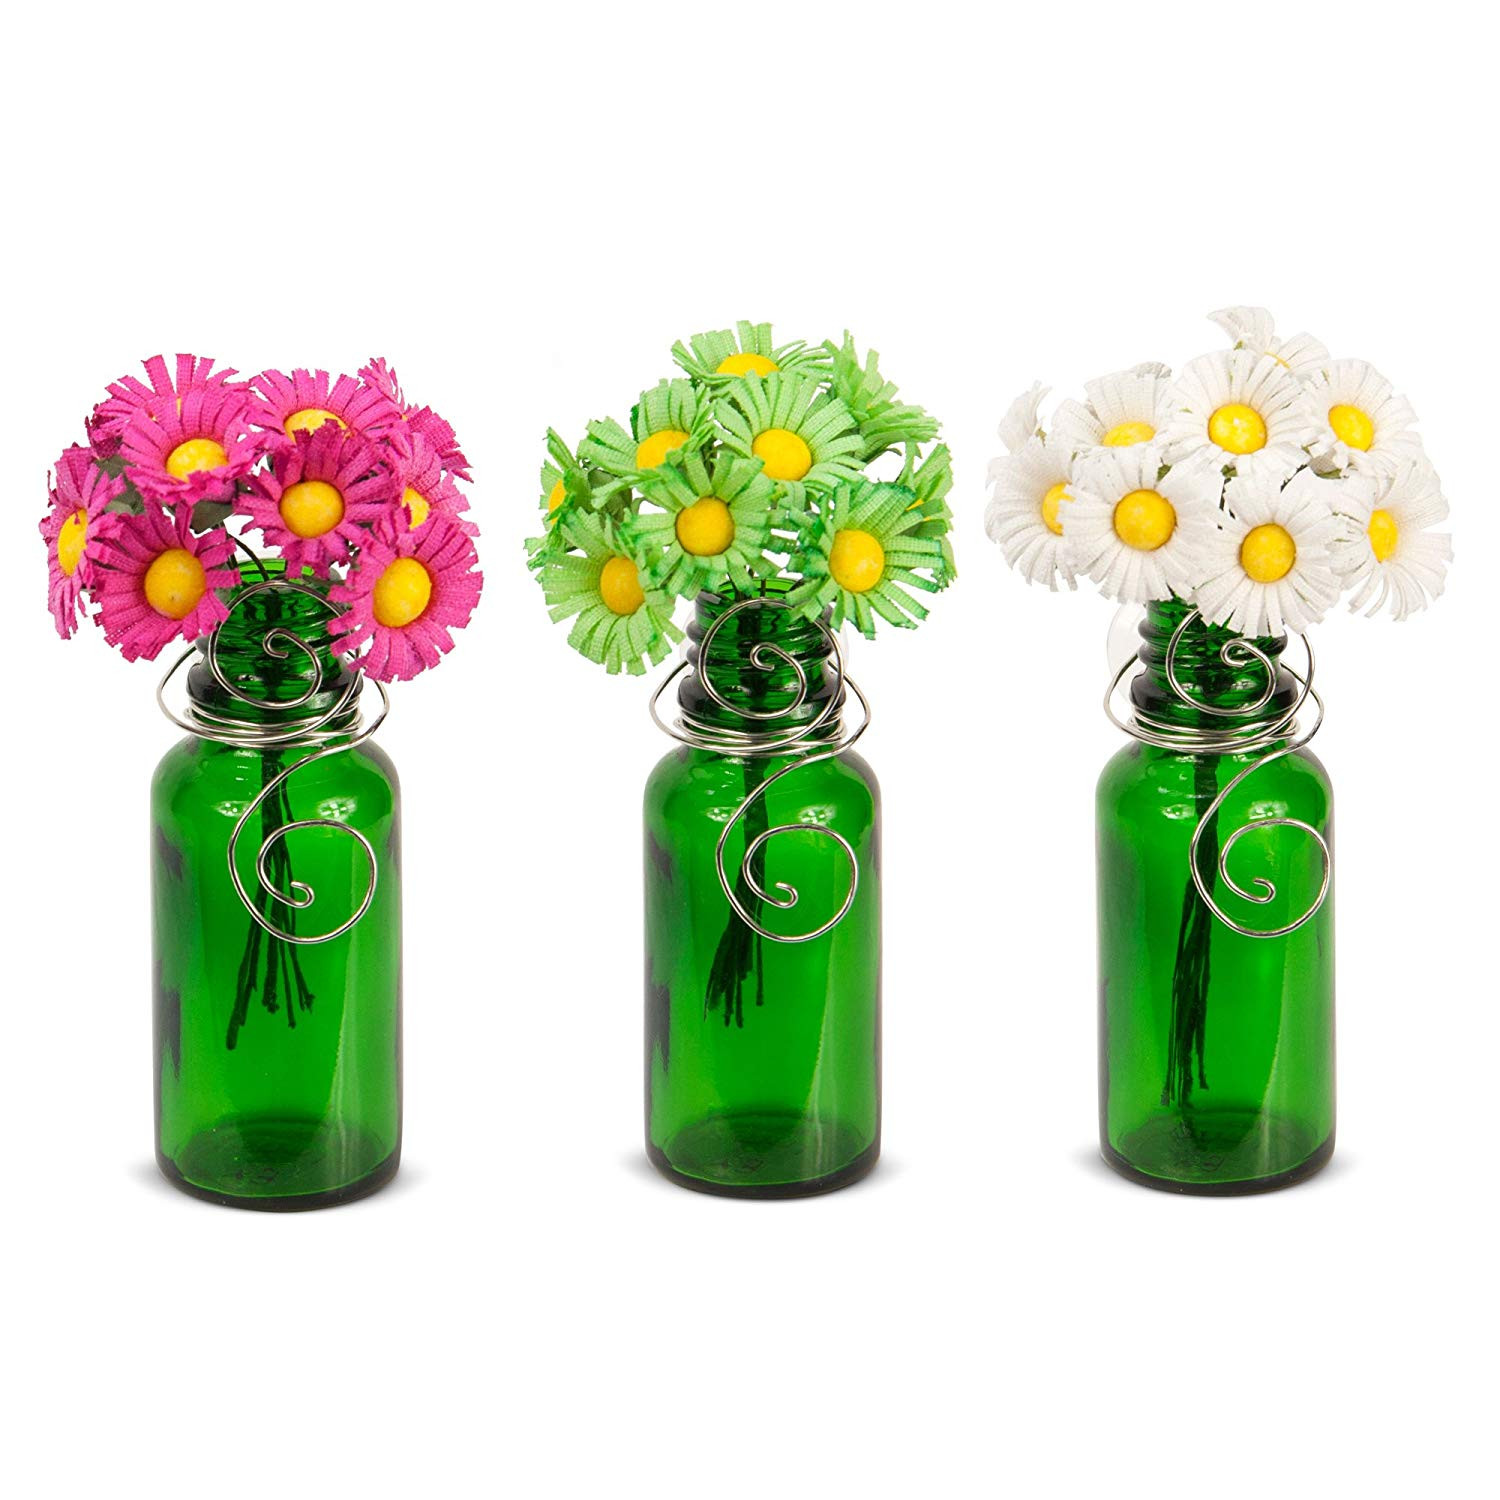 24 Nice Mason Jar Flower Vase Ideas 2024 free download mason jar flower vase ideas of amazon com vazzini mini vase bouquet suction cup bud bottle in amazon com vazzini mini vase bouquet suction cup bud bottle holder with flowers decorative for w